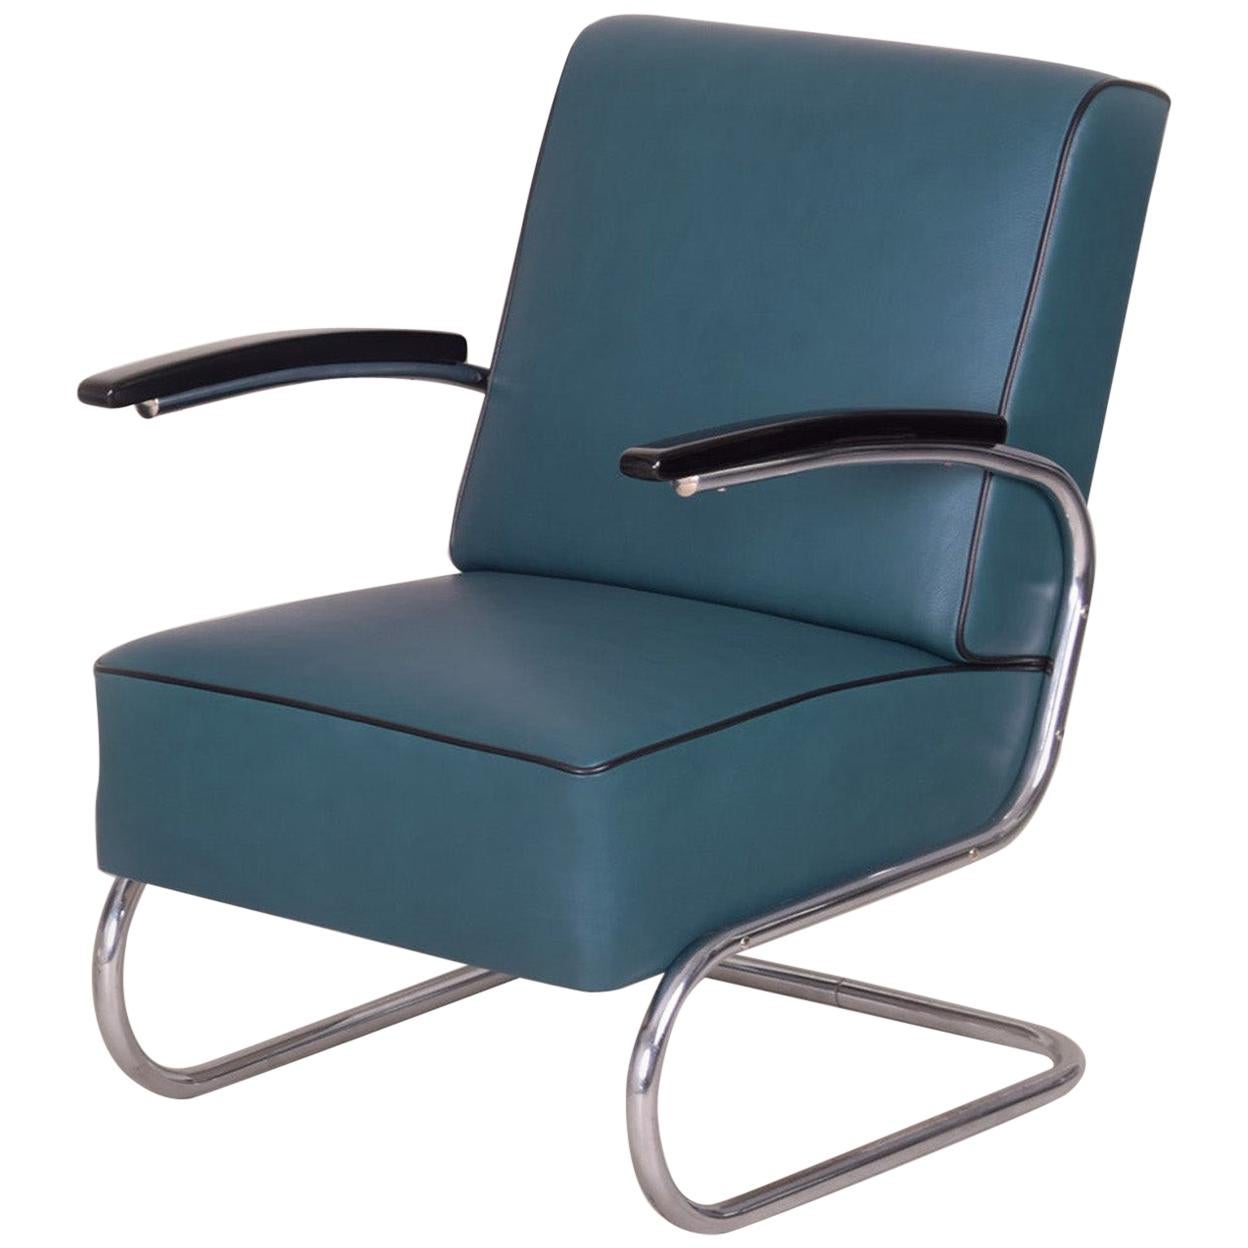 Tubular Steel Cantilever Armchair in Art Deco, Chrome, New Blue Leather, 1930s For Sale